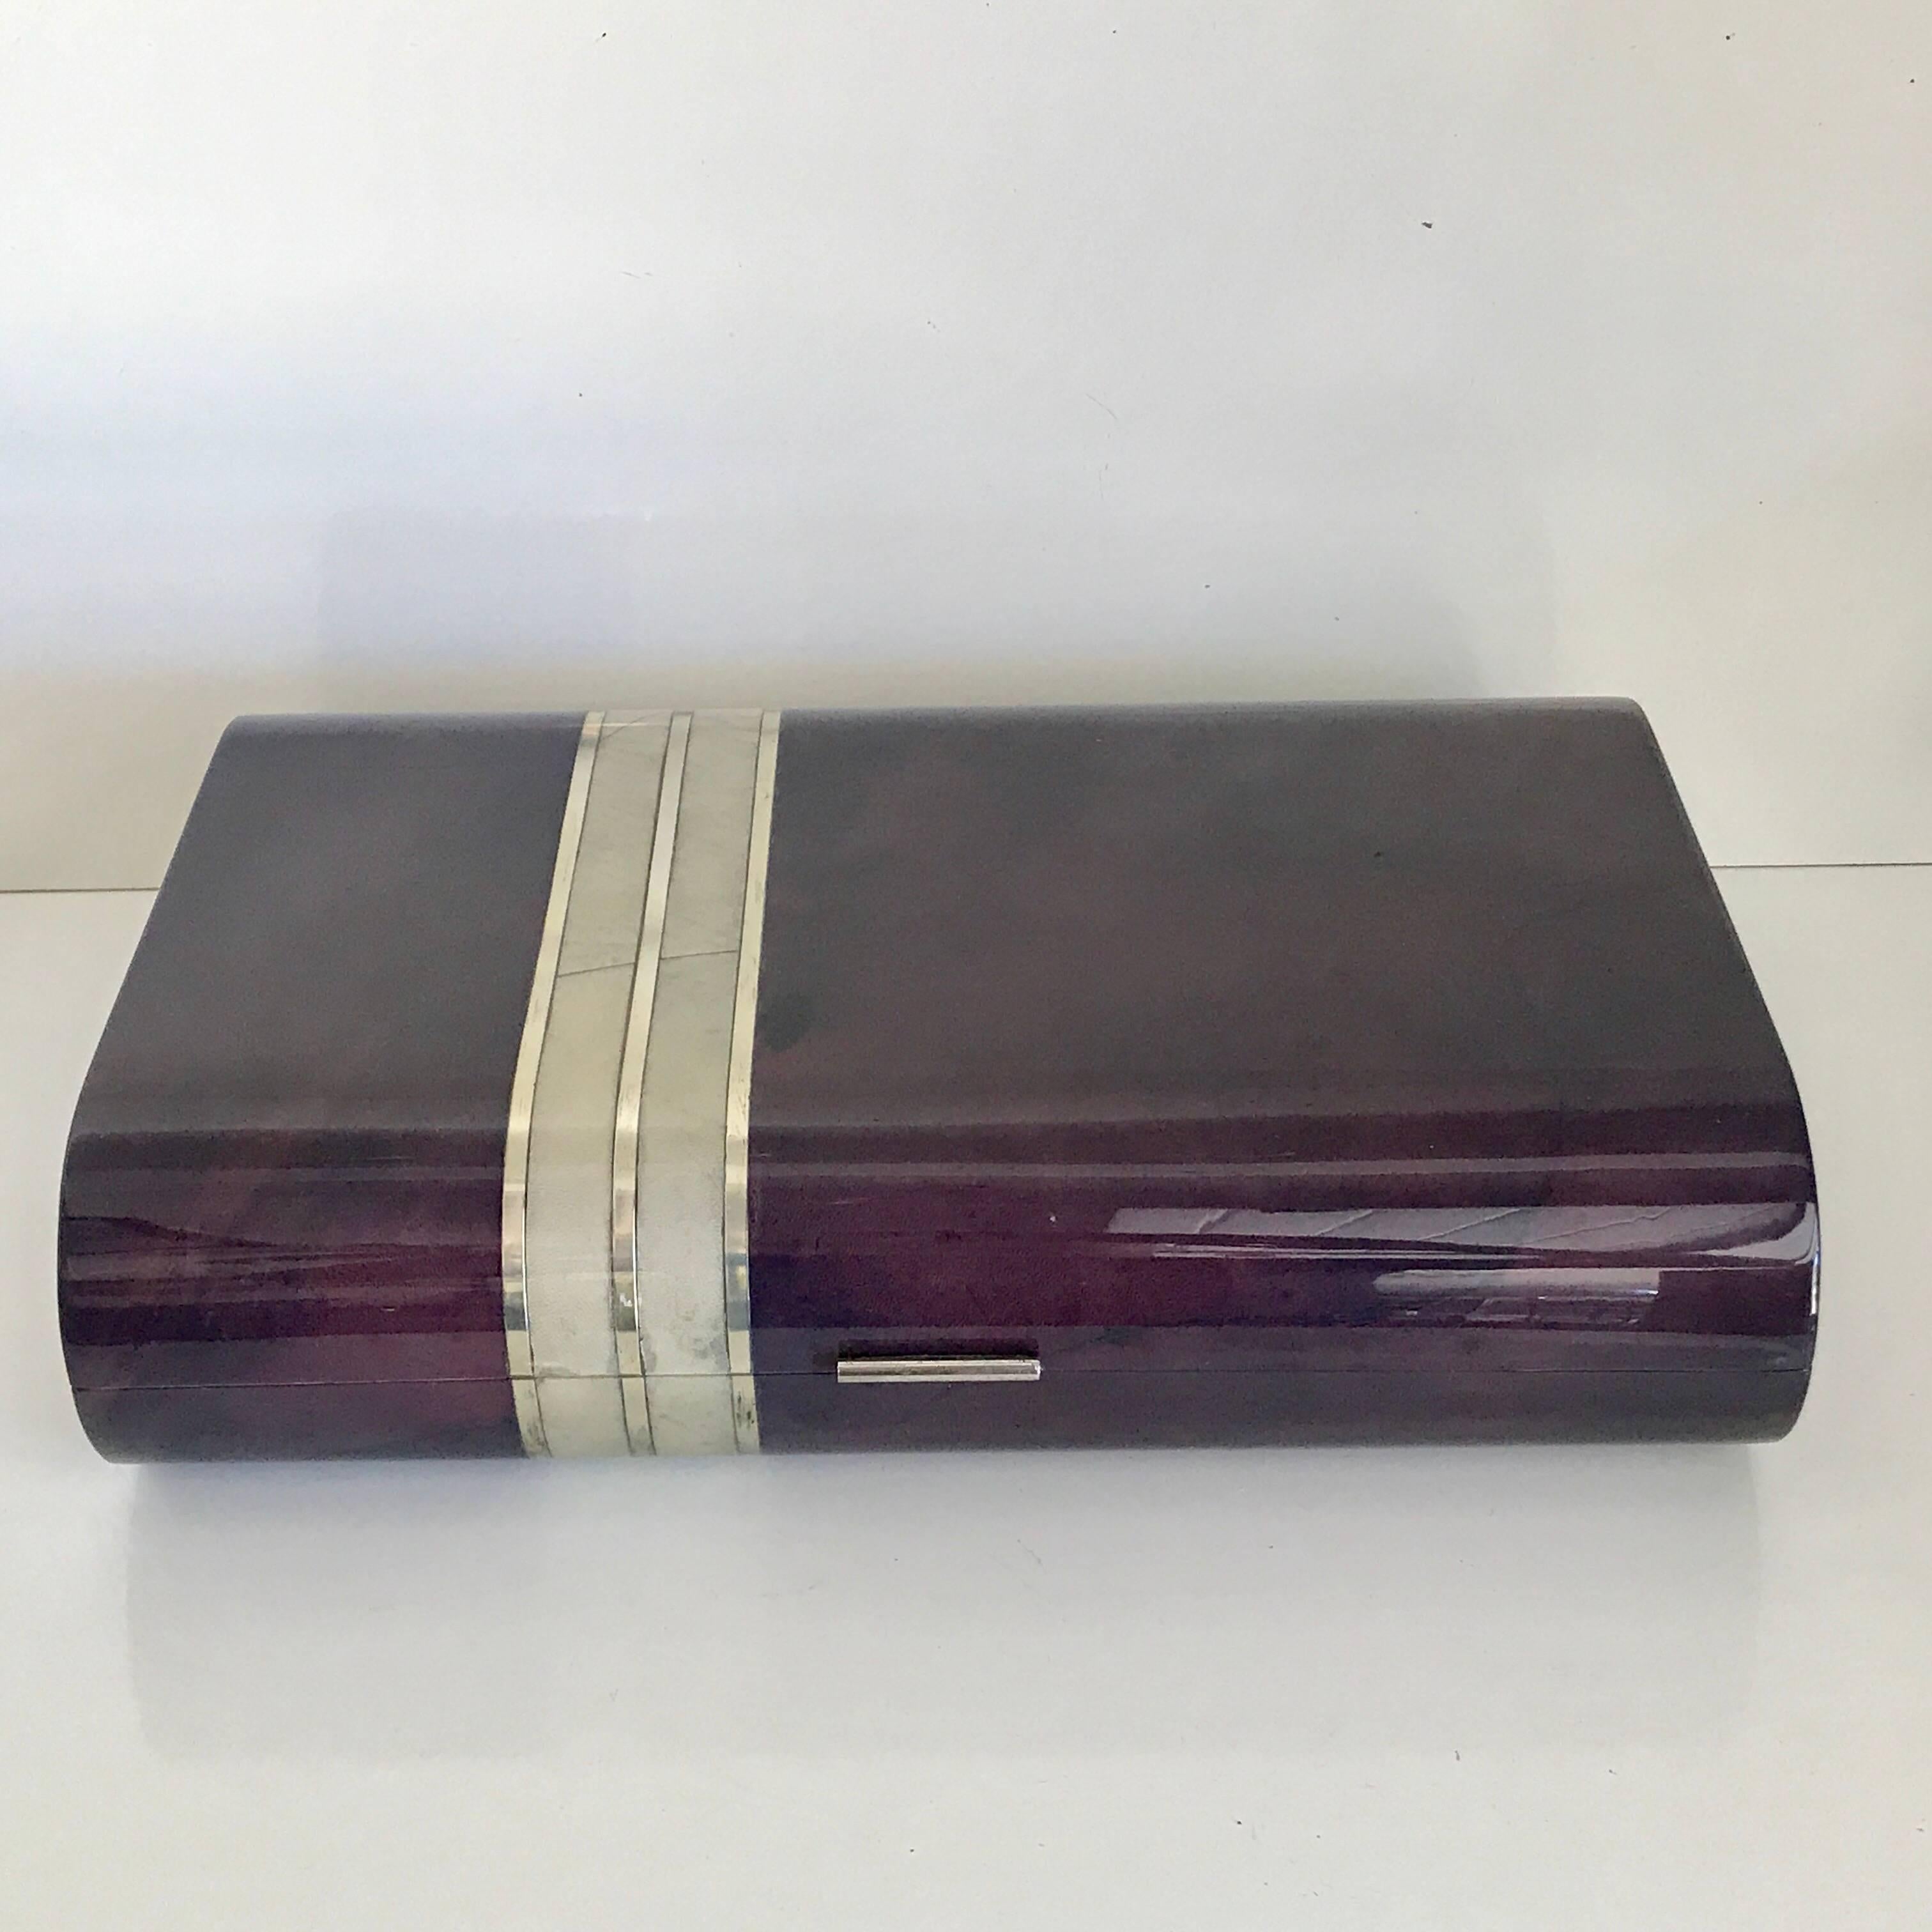 Huge signed Enrique Garcel amethyst goatskin and silver inlaid bone table box, with a lacquered wood interior.
Excellent vintage condition, not new, some signs of use and wear are apparent, anything significant would be noted/pictured. There are